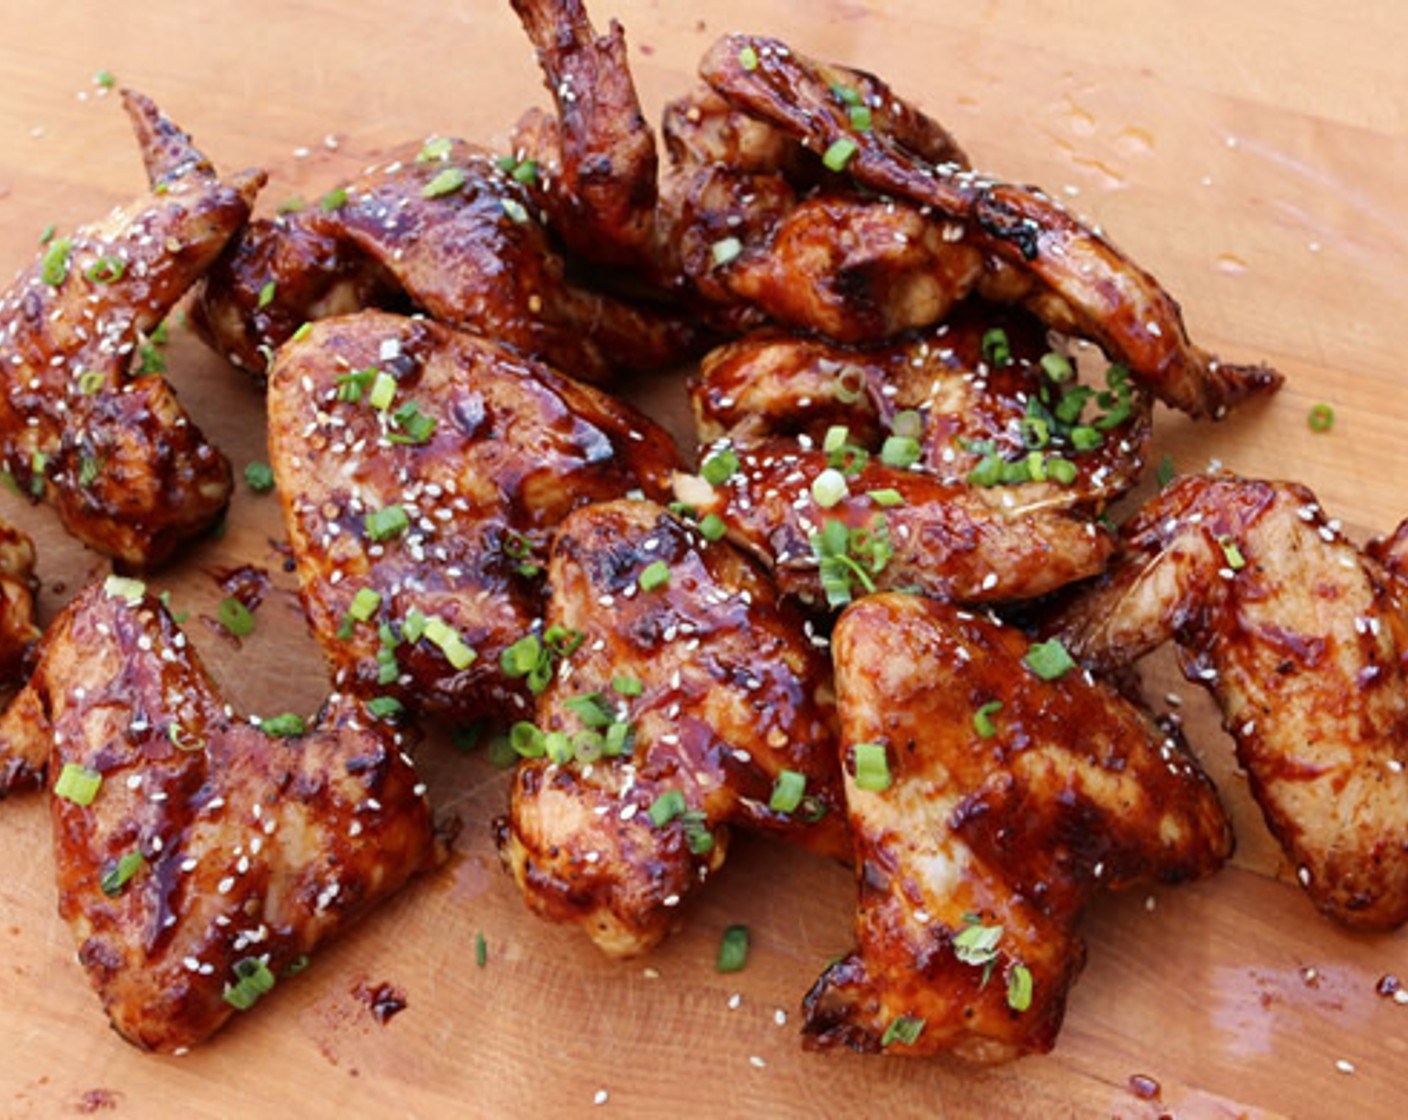 step 10 Arrange the wings on a large platter and garnish with Sesame Seeds (1 pinch) and Scallion (1 pinch) before serving.